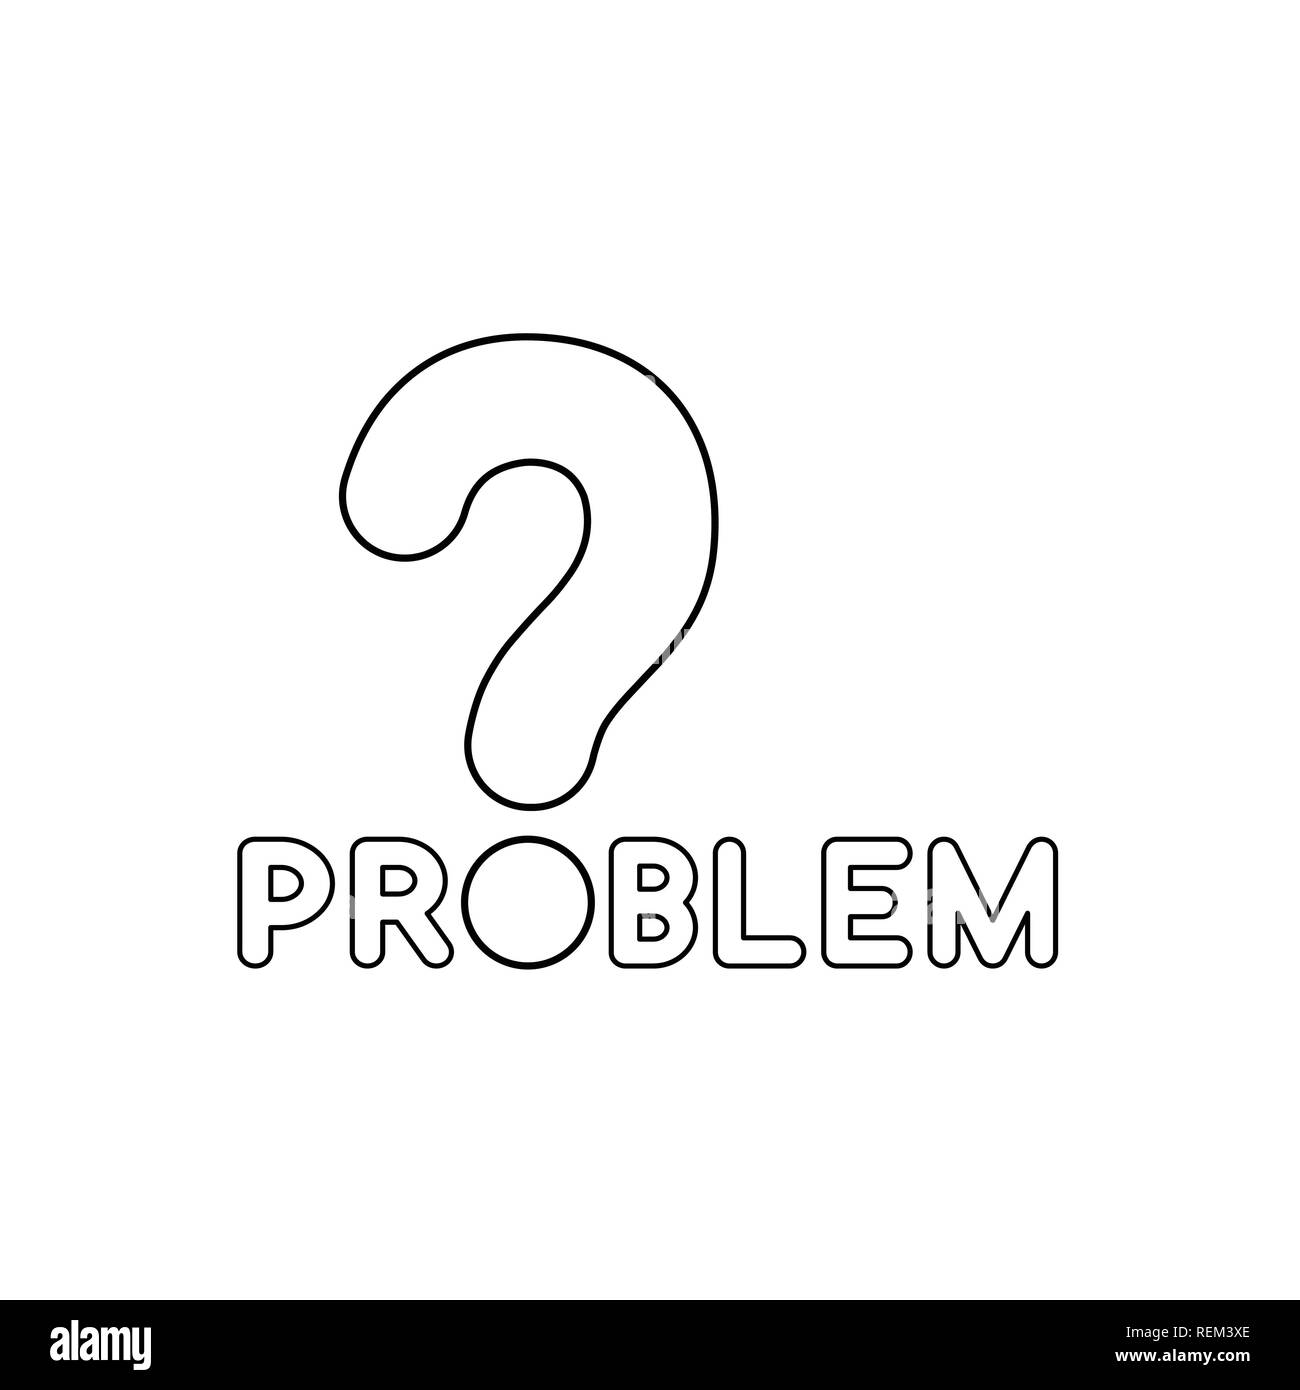 Flat design style vector illustration concept of problem text with question mark on white background. Black outlines. Stock Vector